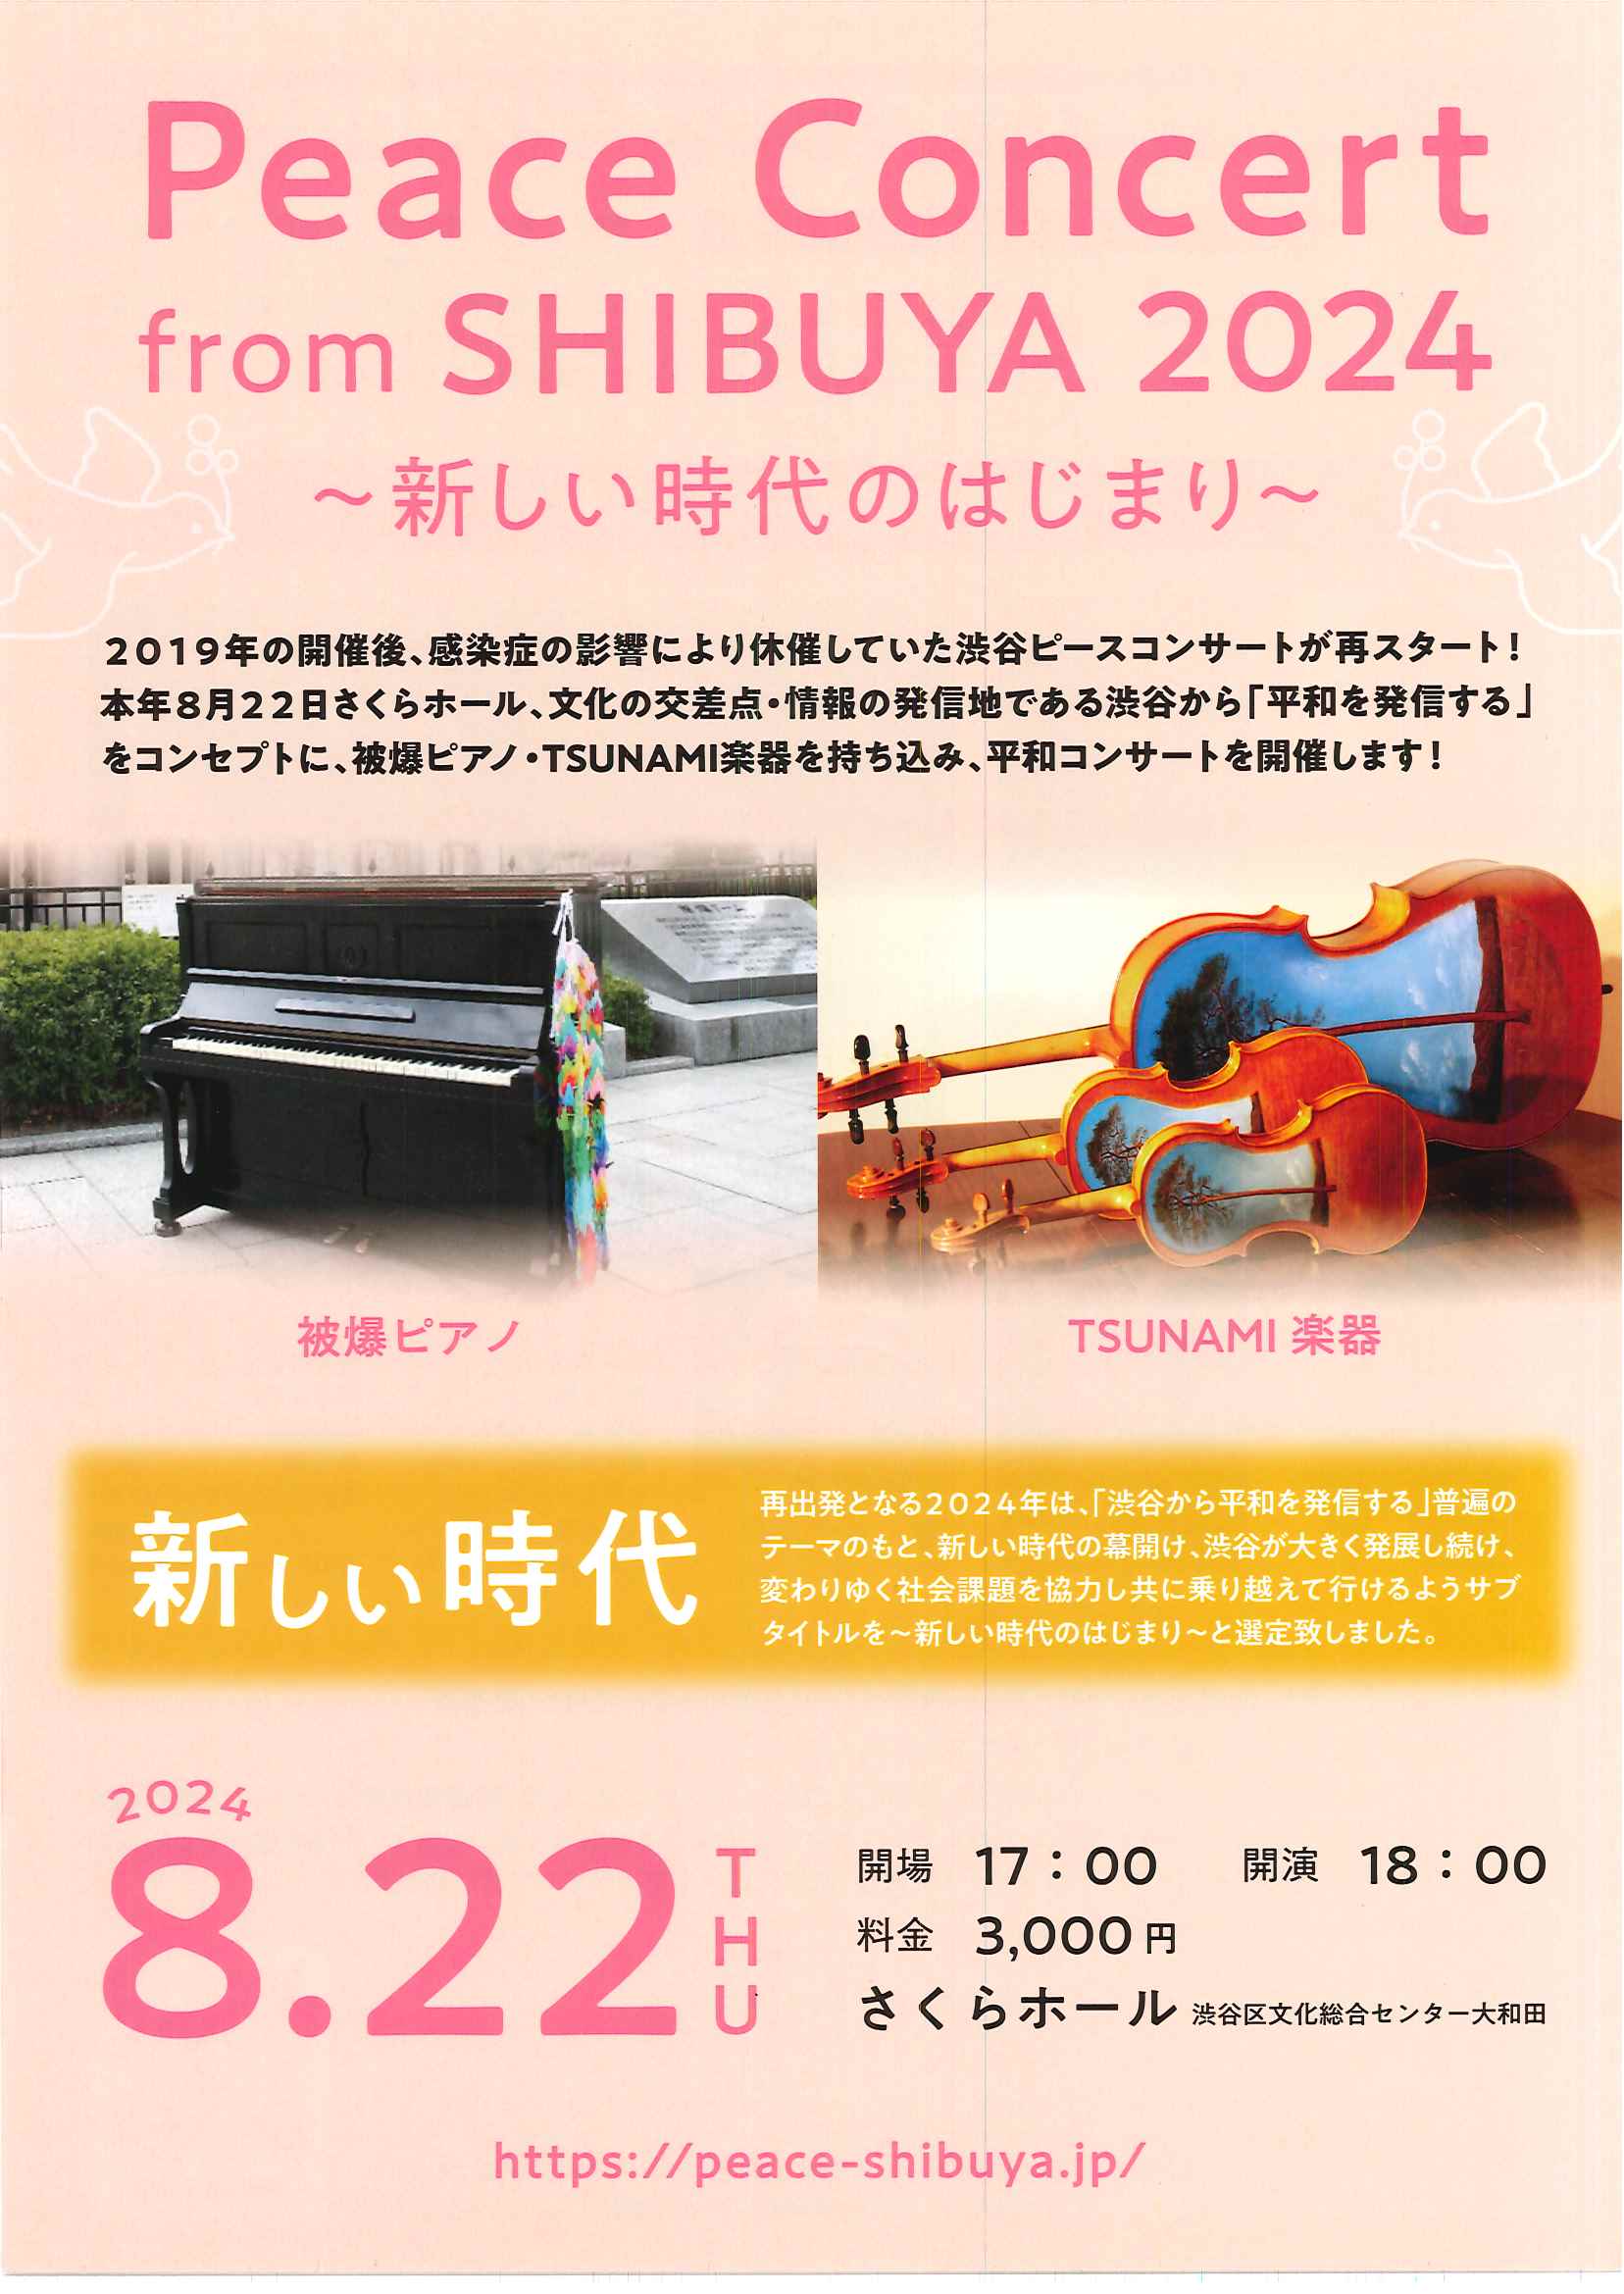 8/22 Peace Concert from SHIBUYA 2024